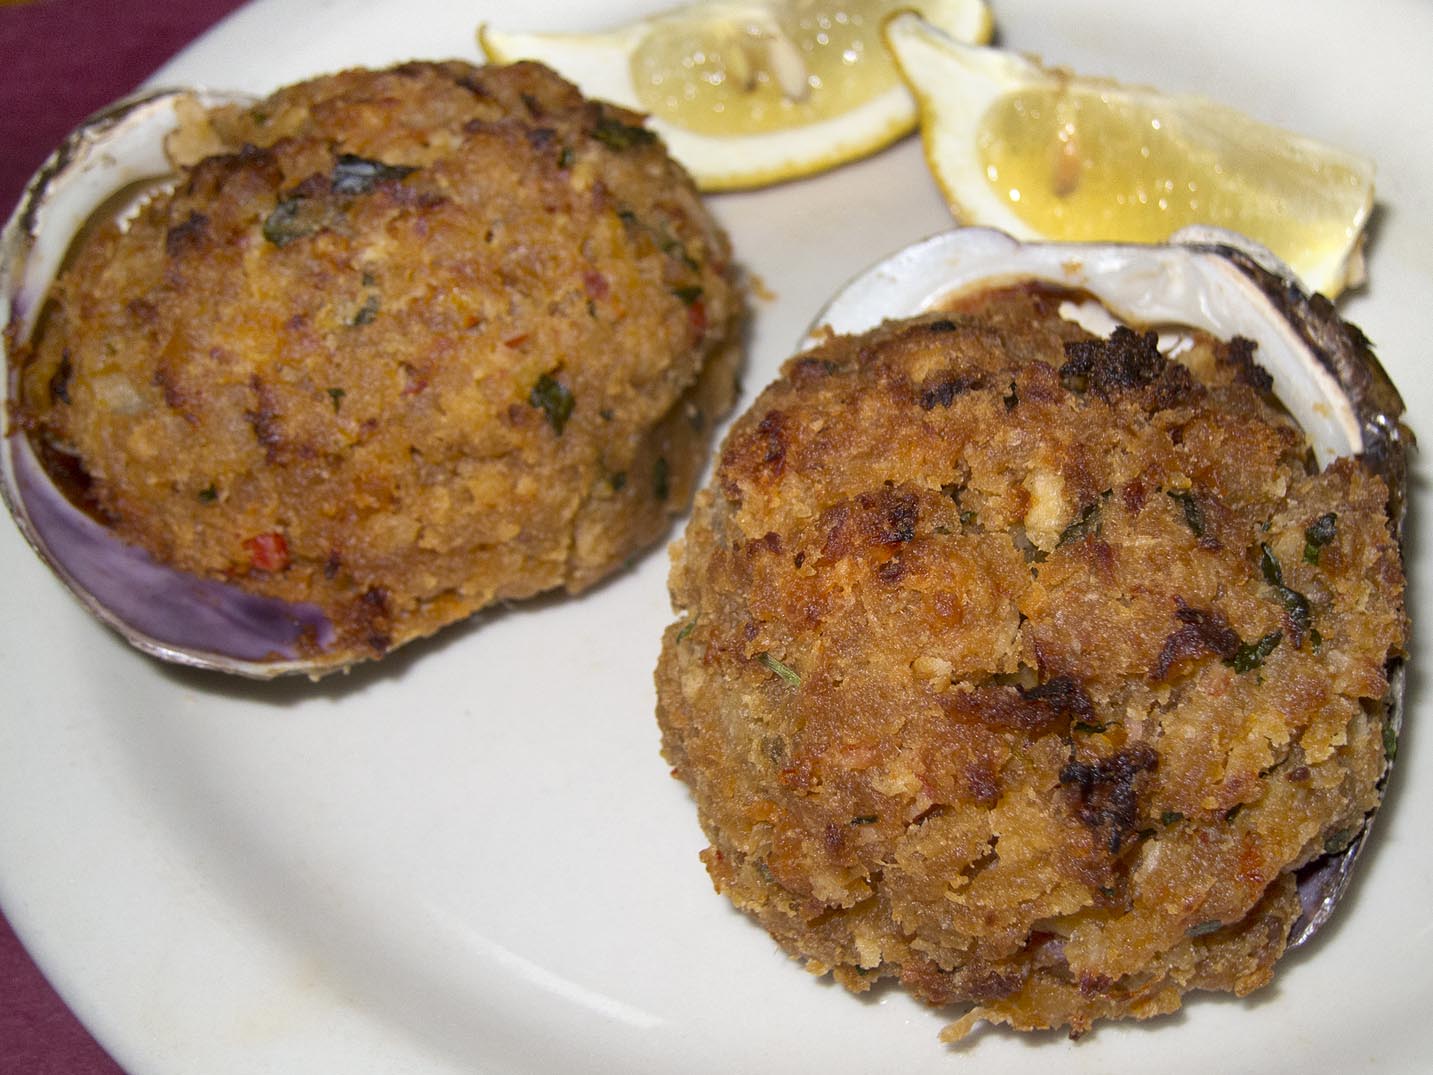 Stuffed quahog clams, or stuffies, from Providence, Rhode Island